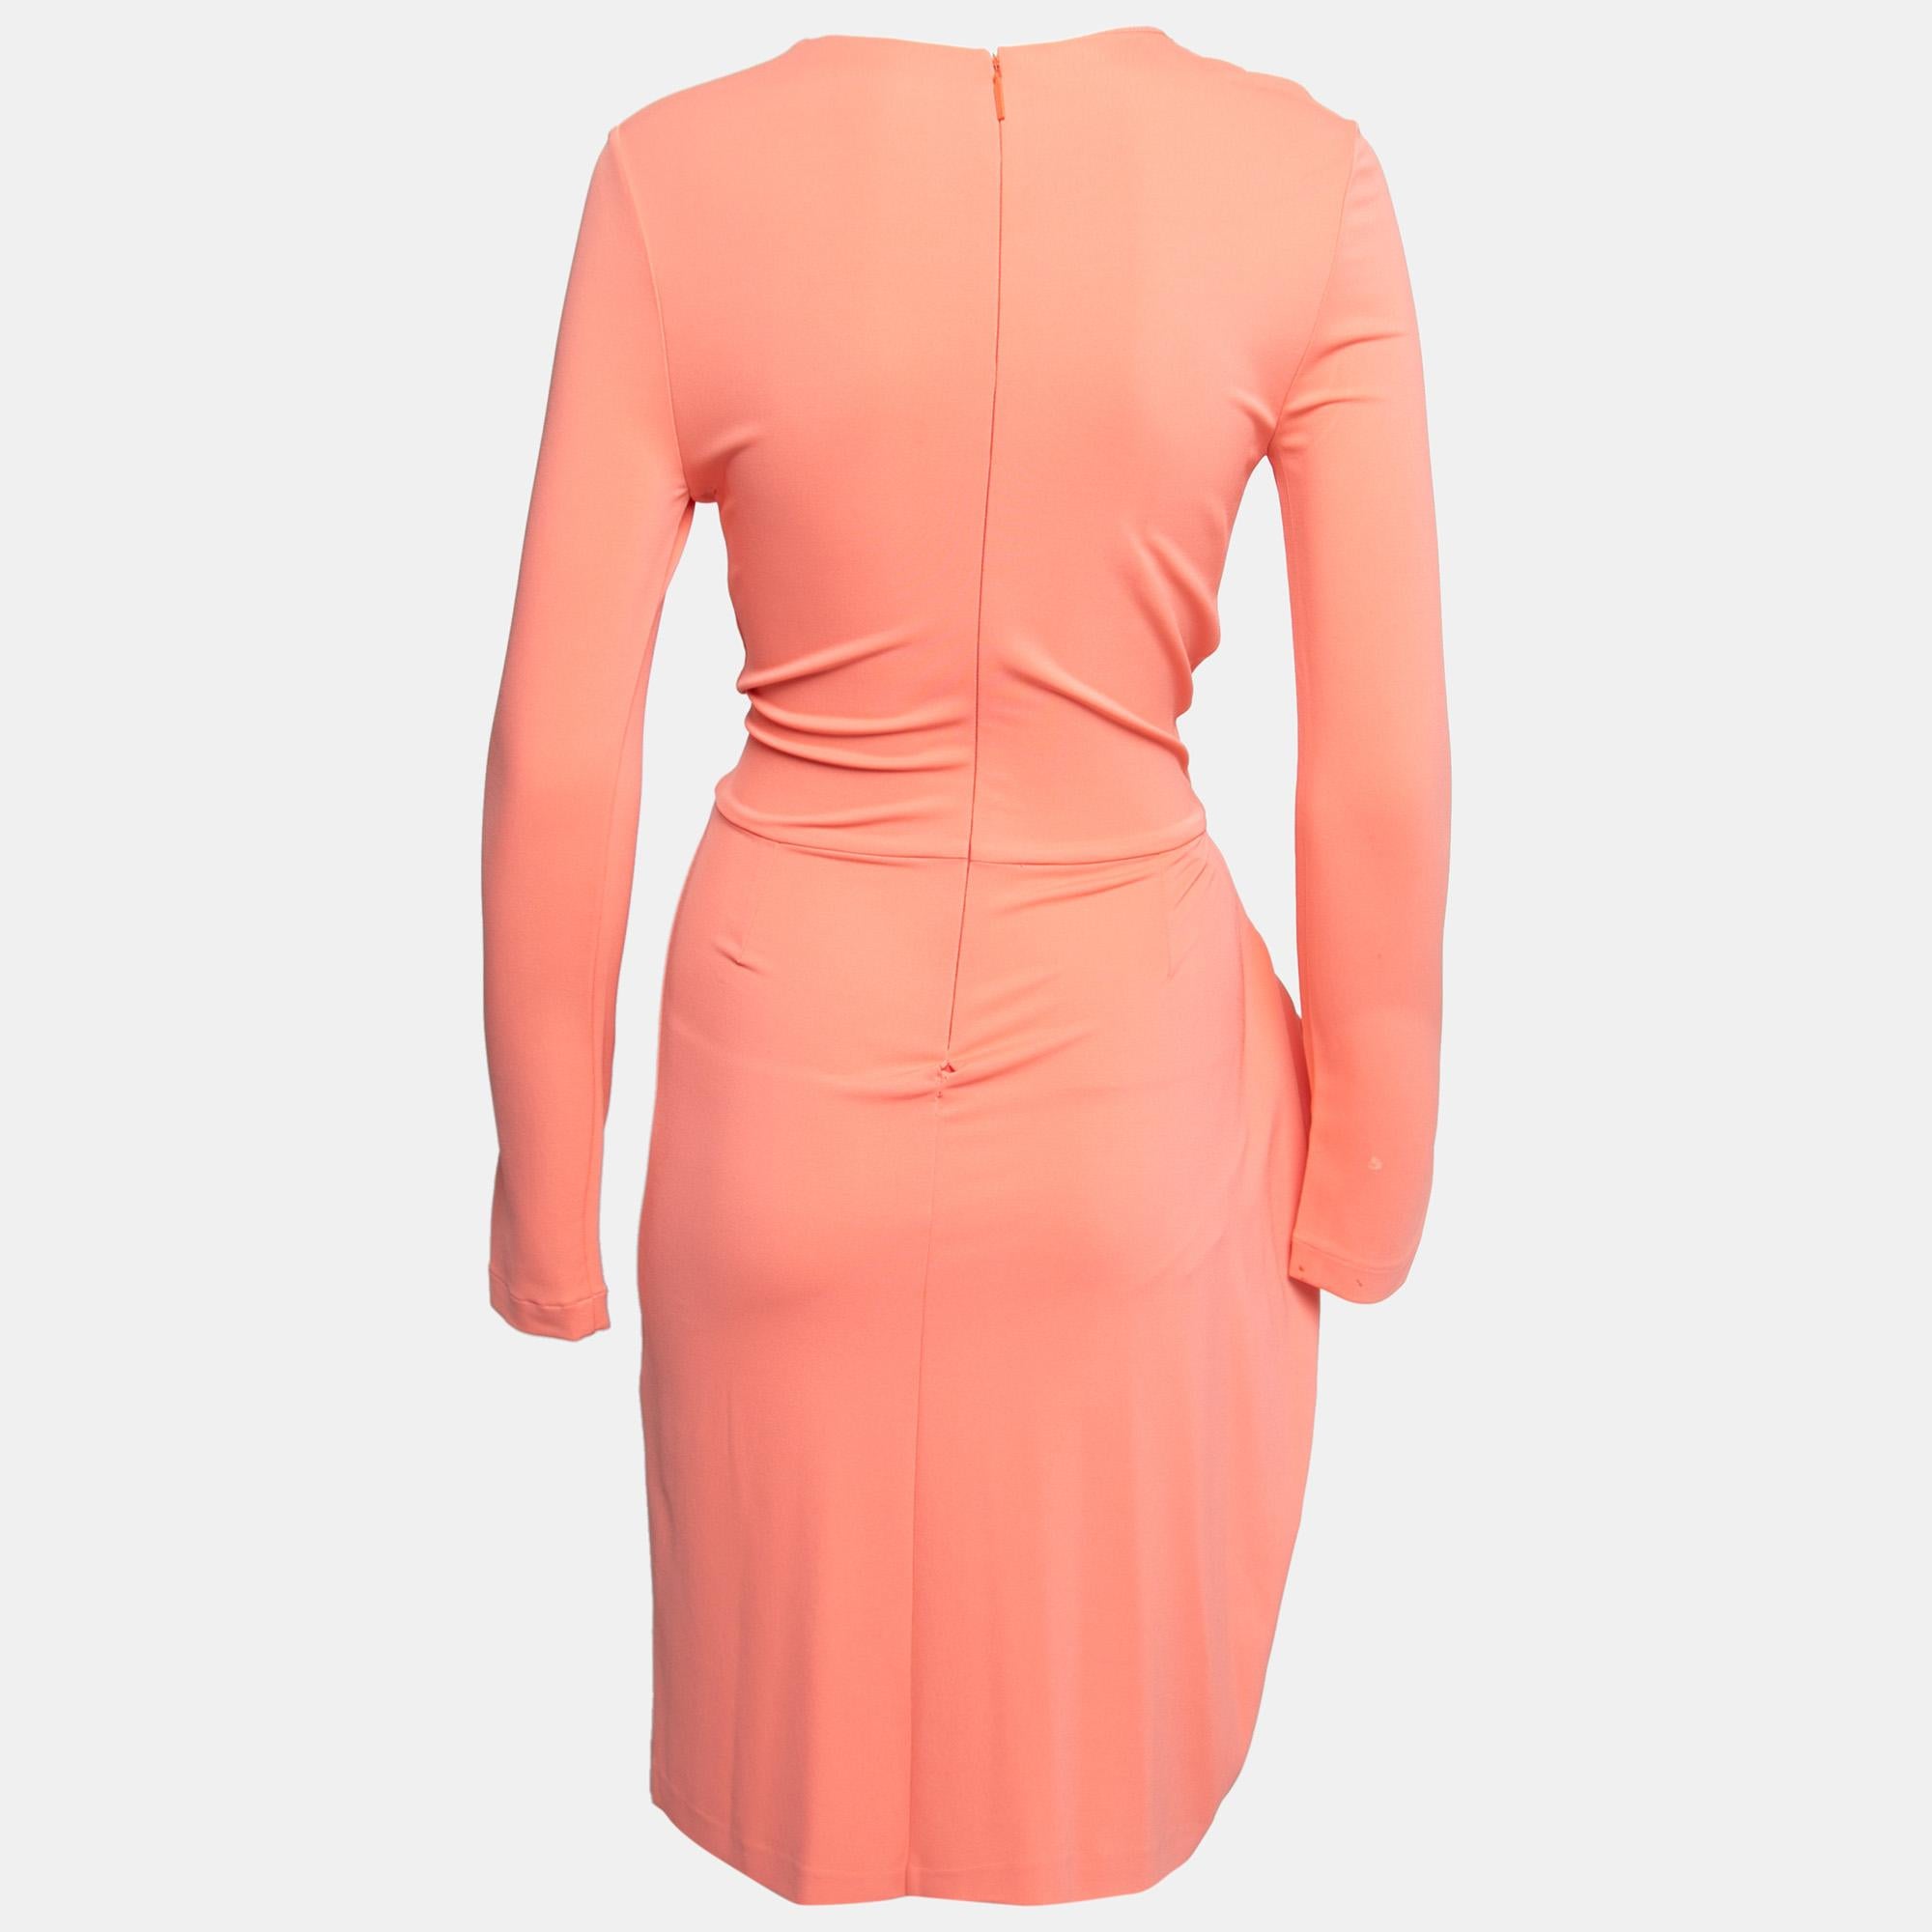 There's truly no better way to feel elegant and graceful than to wear something pretty like this dress. From Roberto Cavalli, this dress is cut from peach jersey fabric, augmented with embellishments, and finished with drapes. This dress exhibits a